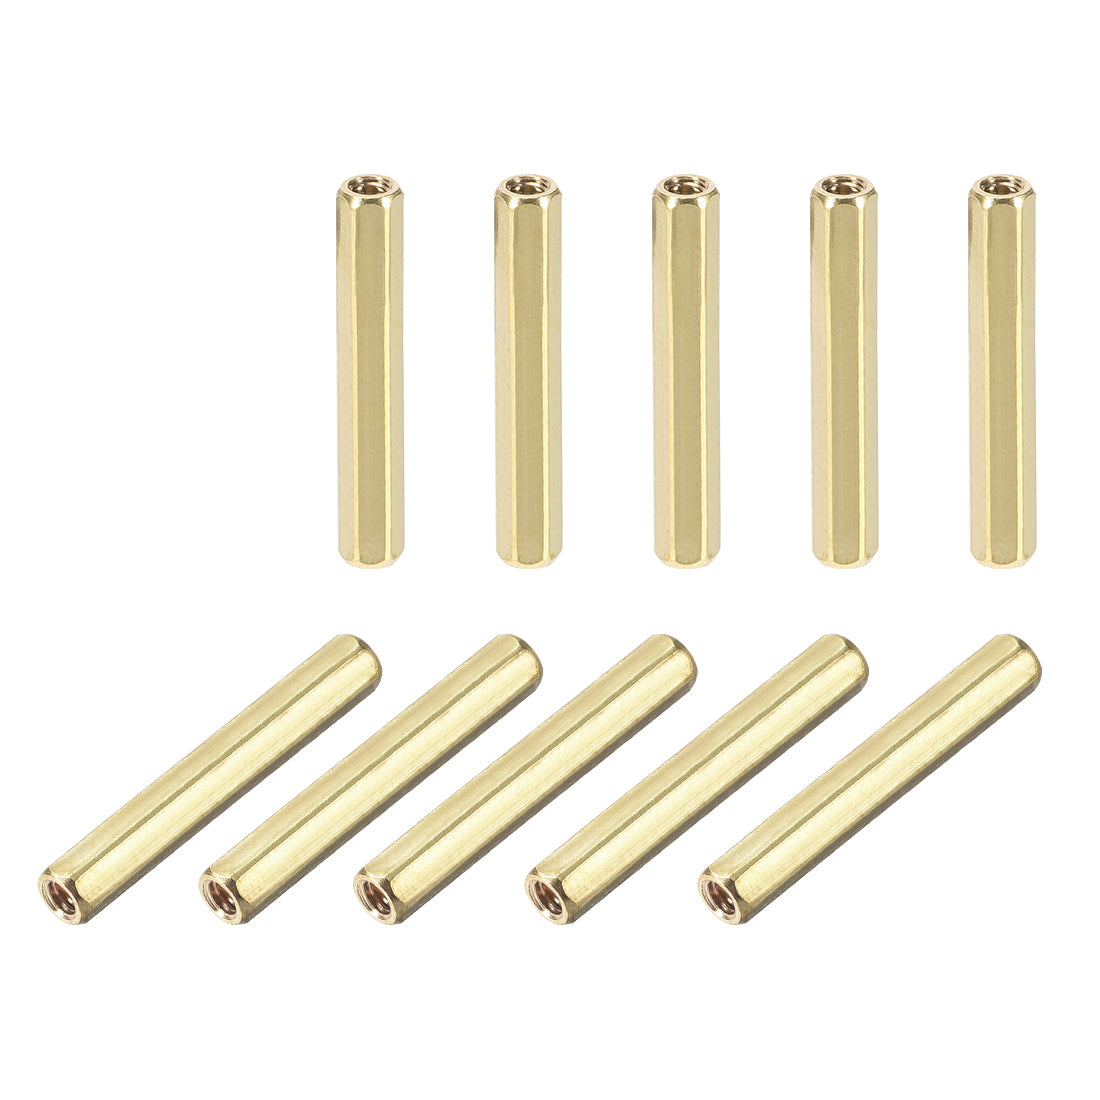 Uxcell Uxcell M2 x 25mm Female to Female Hex Brass Spacer Standoff 10pcs